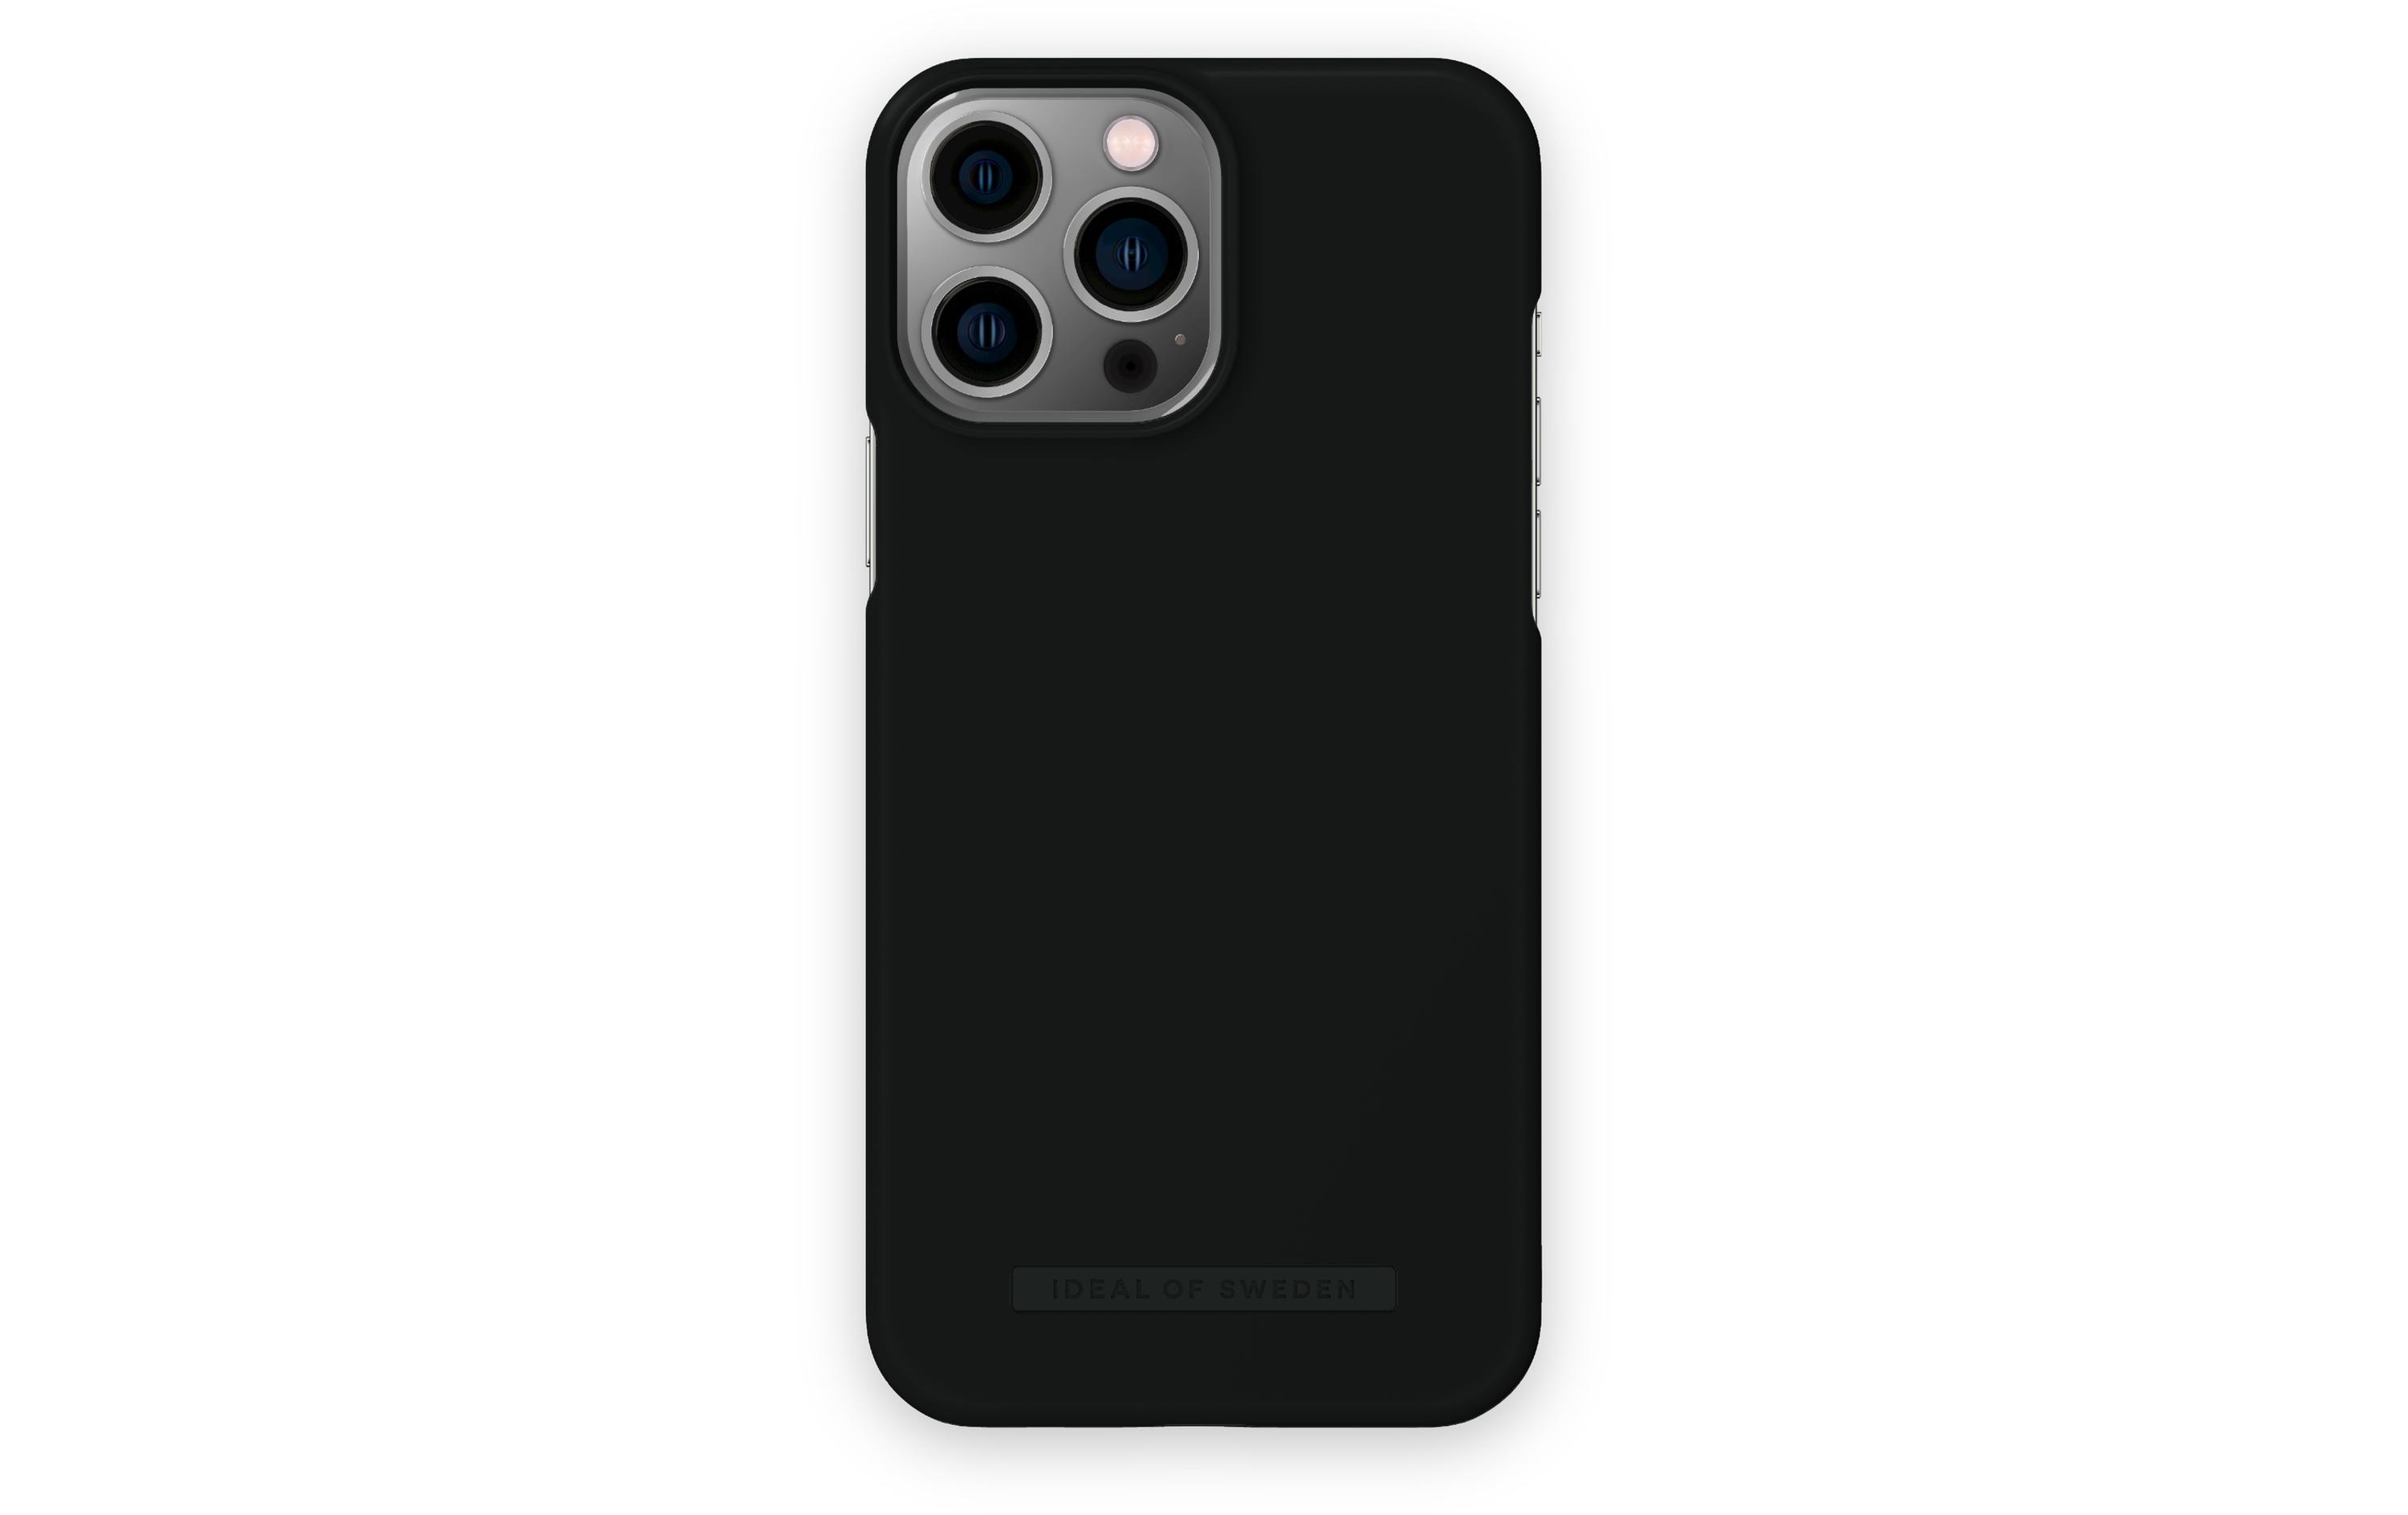 Ideal of Sweden Back Cover Coal Black iPhone 14 Pro Max